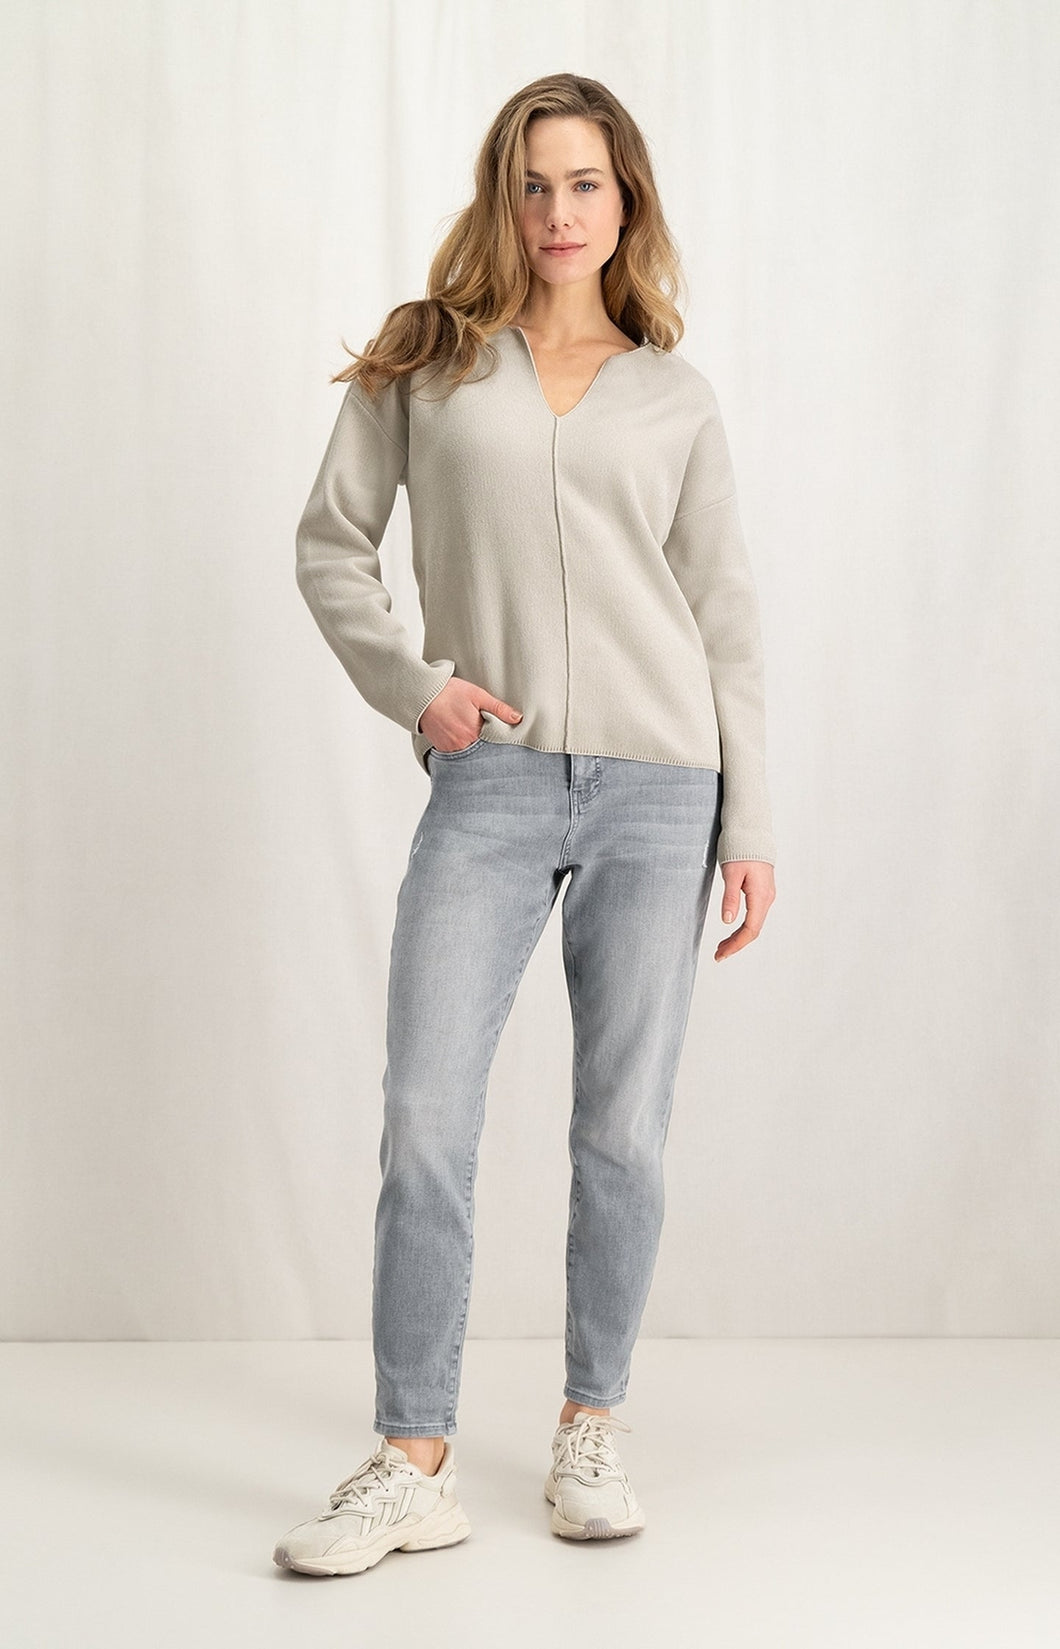 Chenille sweater with long sleeves, V-neck and seam detail - Silver Lining Beige - Type: closeup